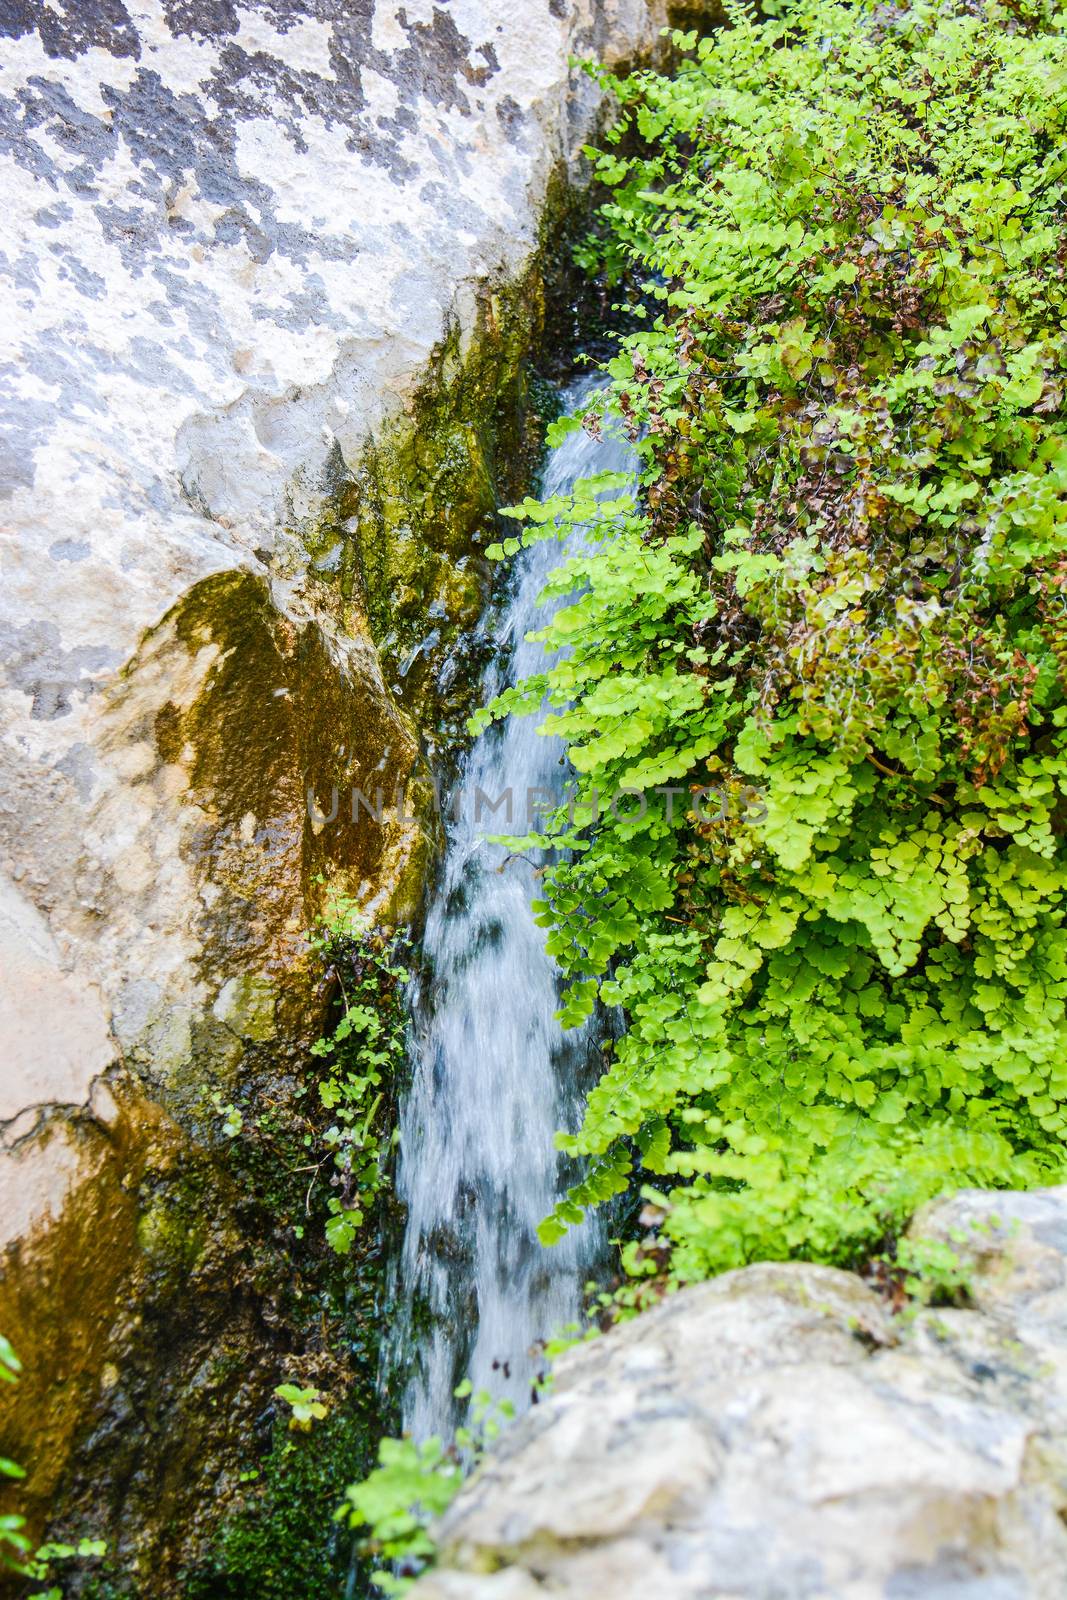 streams and water sources in the mountains